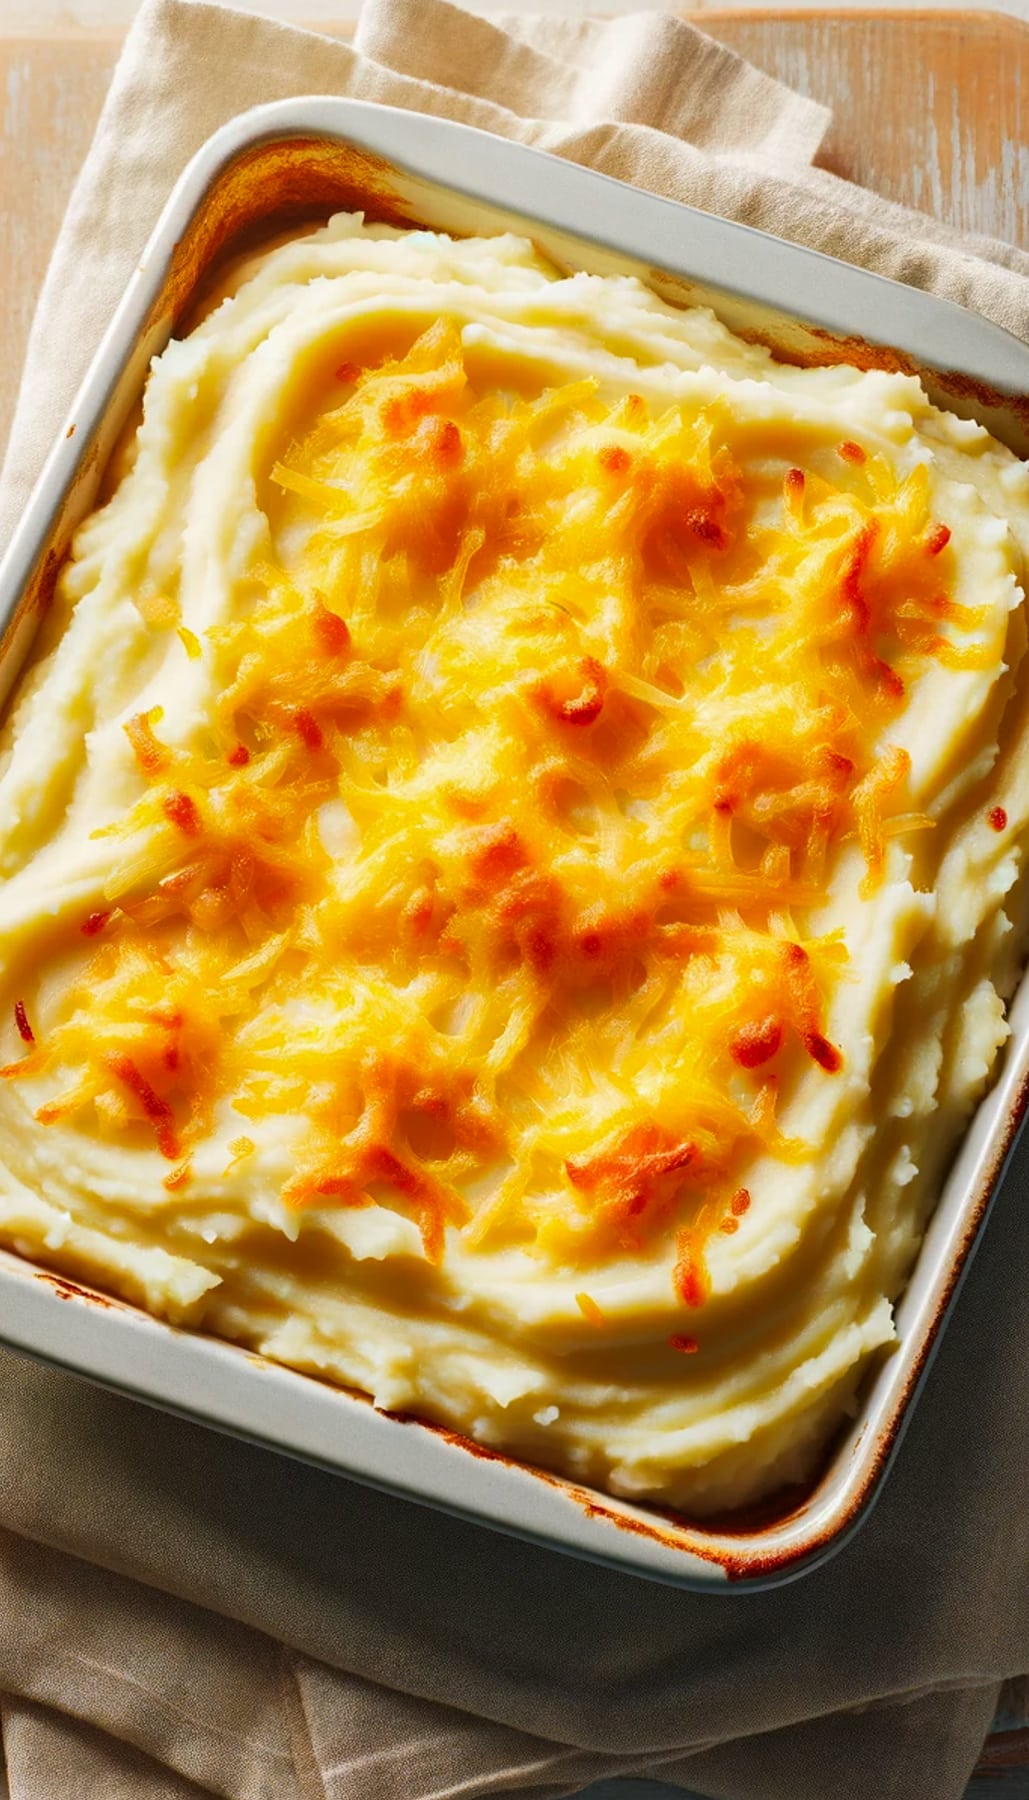 Baking dish filled with creamy mashed potatoes drizzled with butter and topped with melted cheddar cheese.